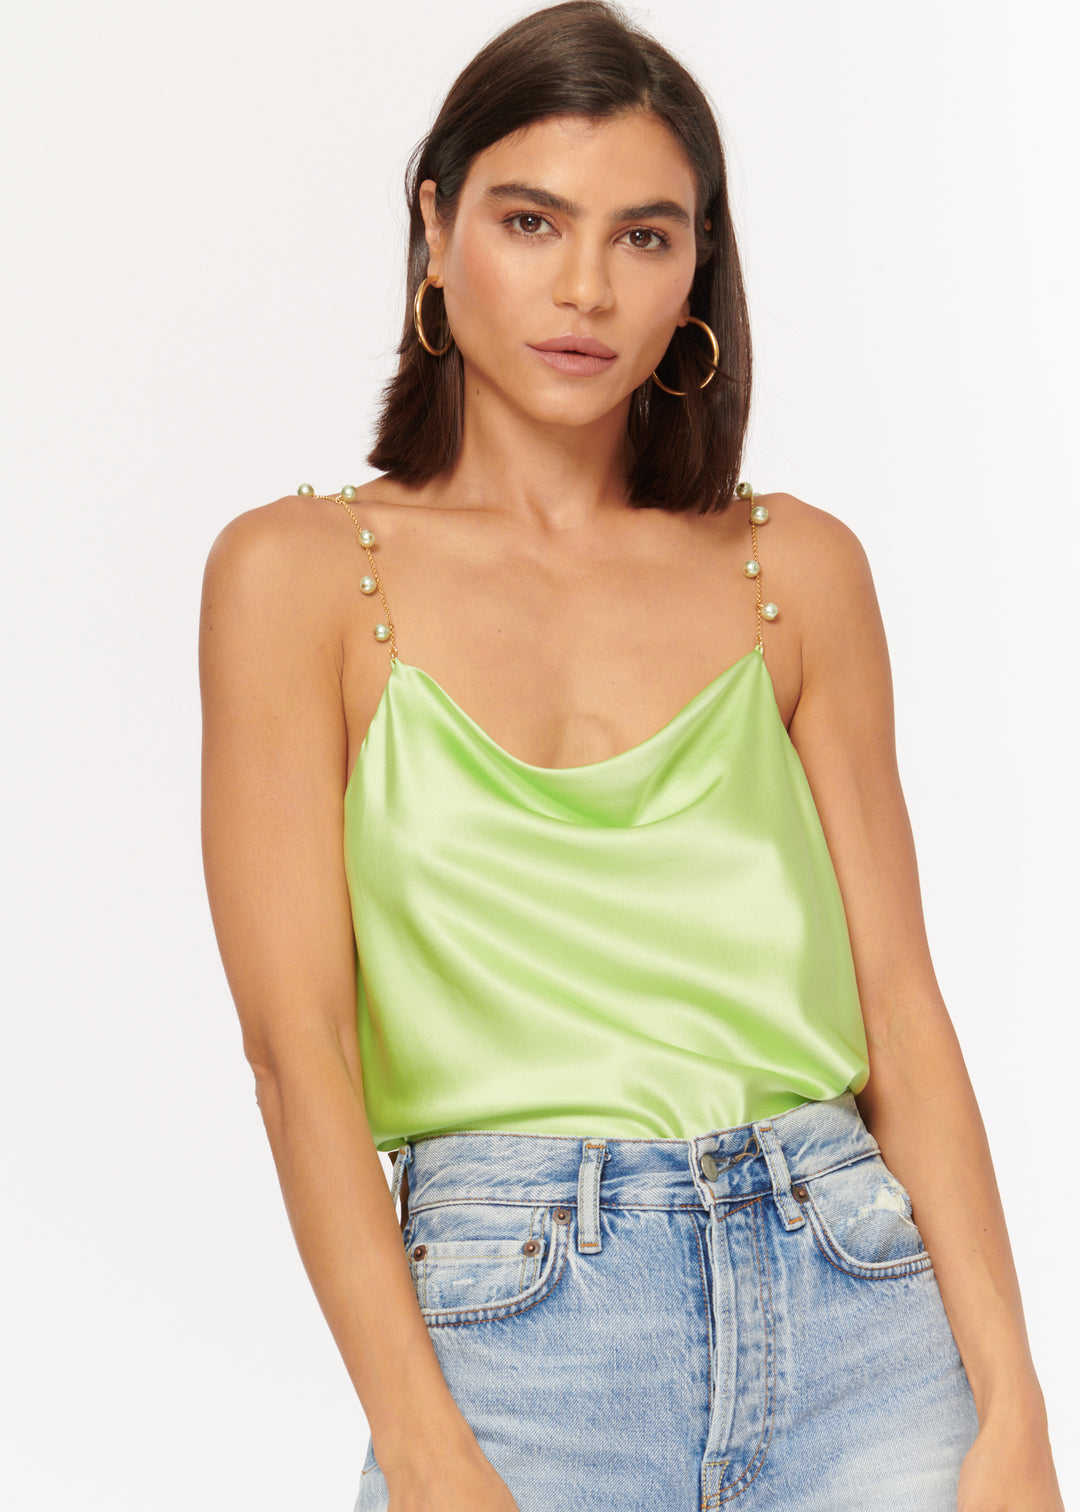 Cami NYC - Busy Bauble Cami in Neo Mint